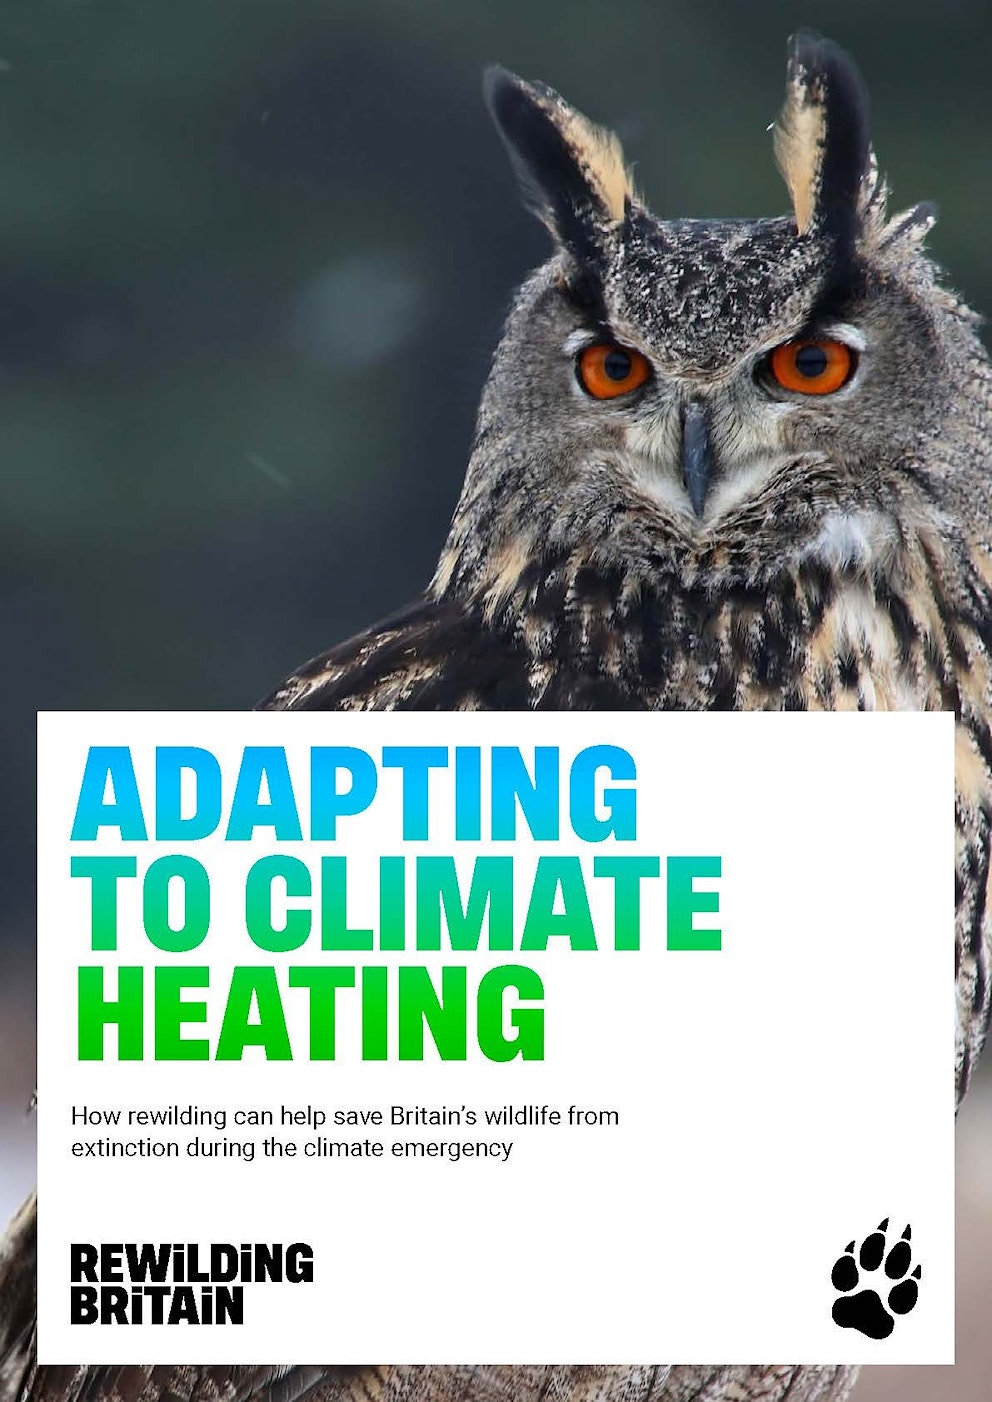 Adapting to climate heating report by Rewilding Britain